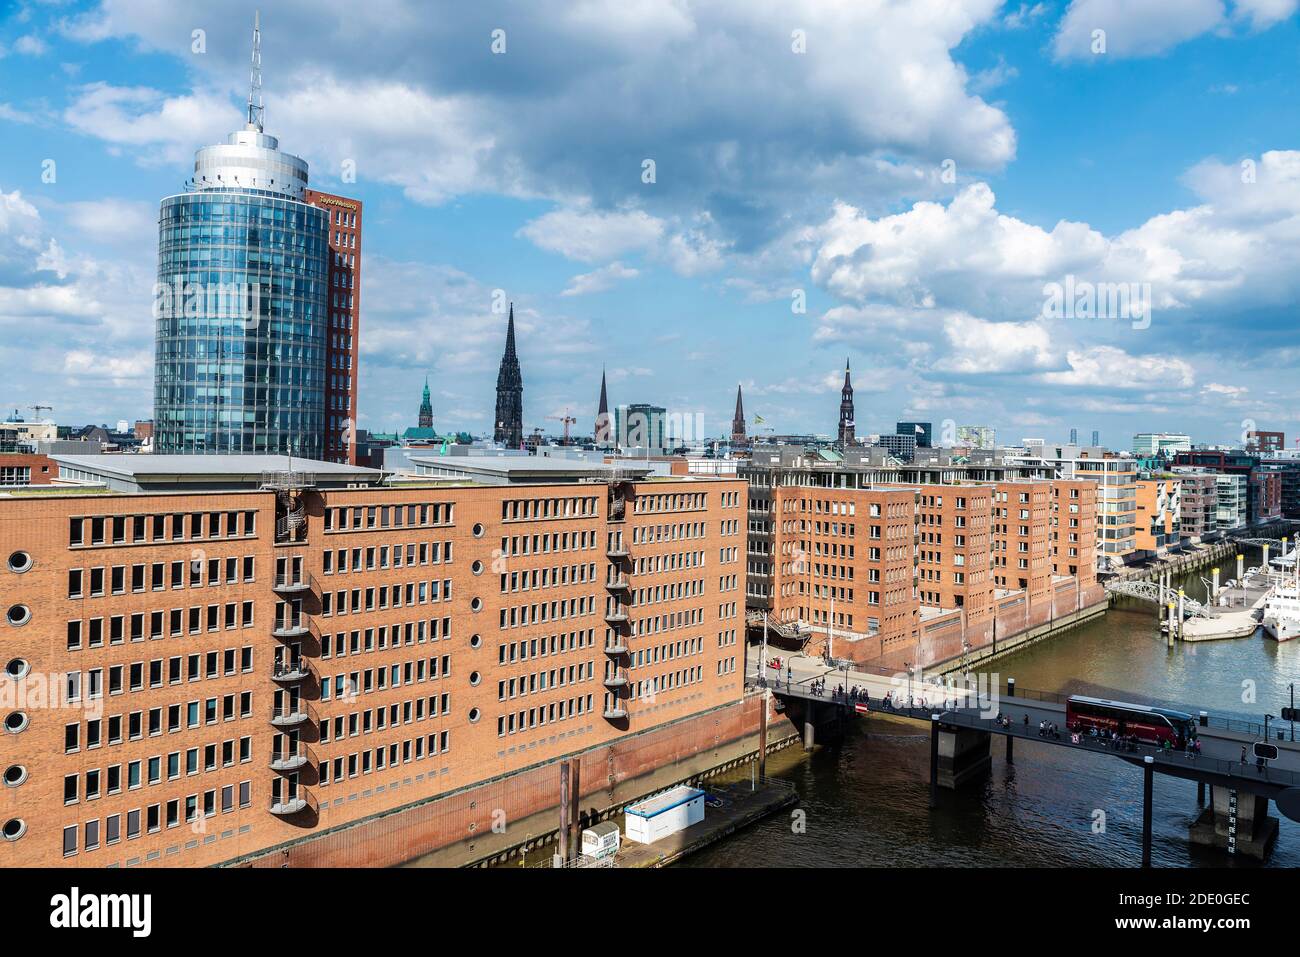 Hamburg, Germany - August 21, 2019: Overview of the Hanseatic Trade Center (HTC) and Columbus Haus, modern office building with people around in Hafen Stock Photo